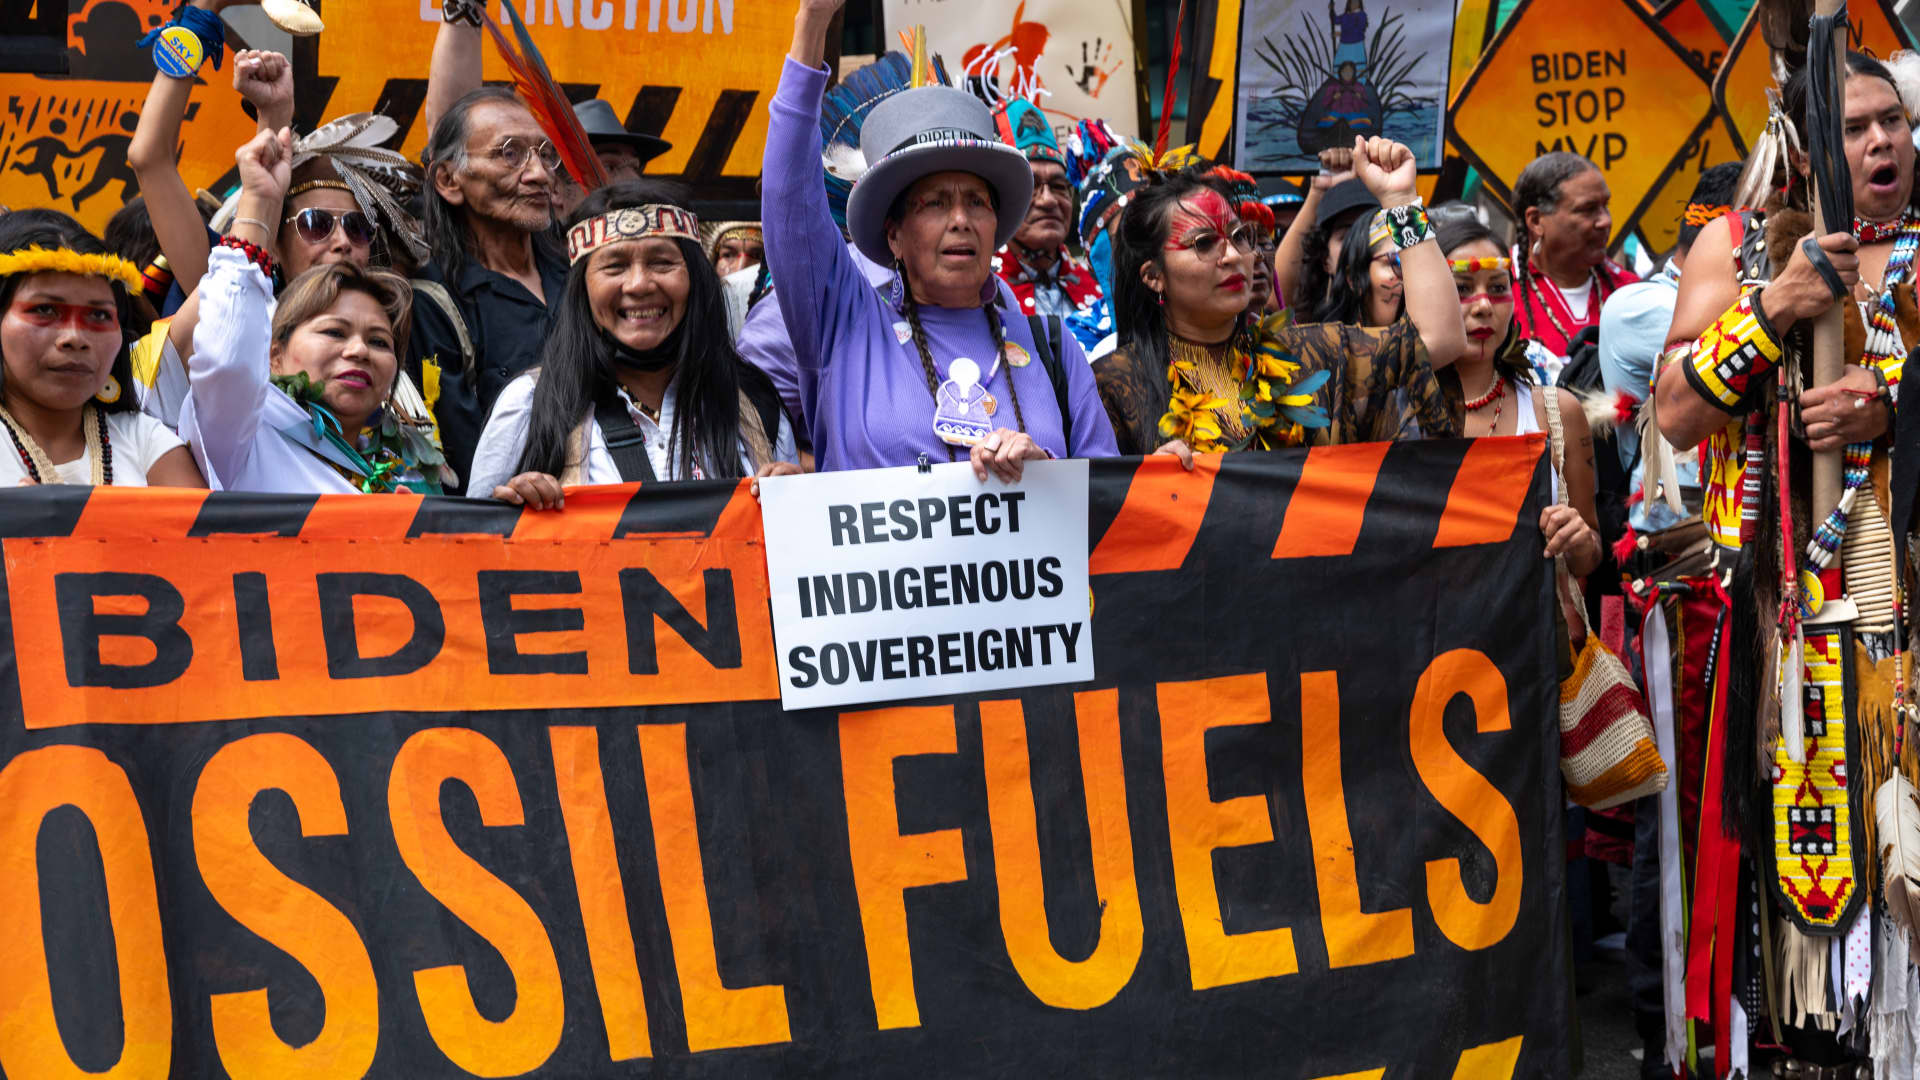 Tens of thousands march to demand end to fossil fuels ahead of UN climate summit